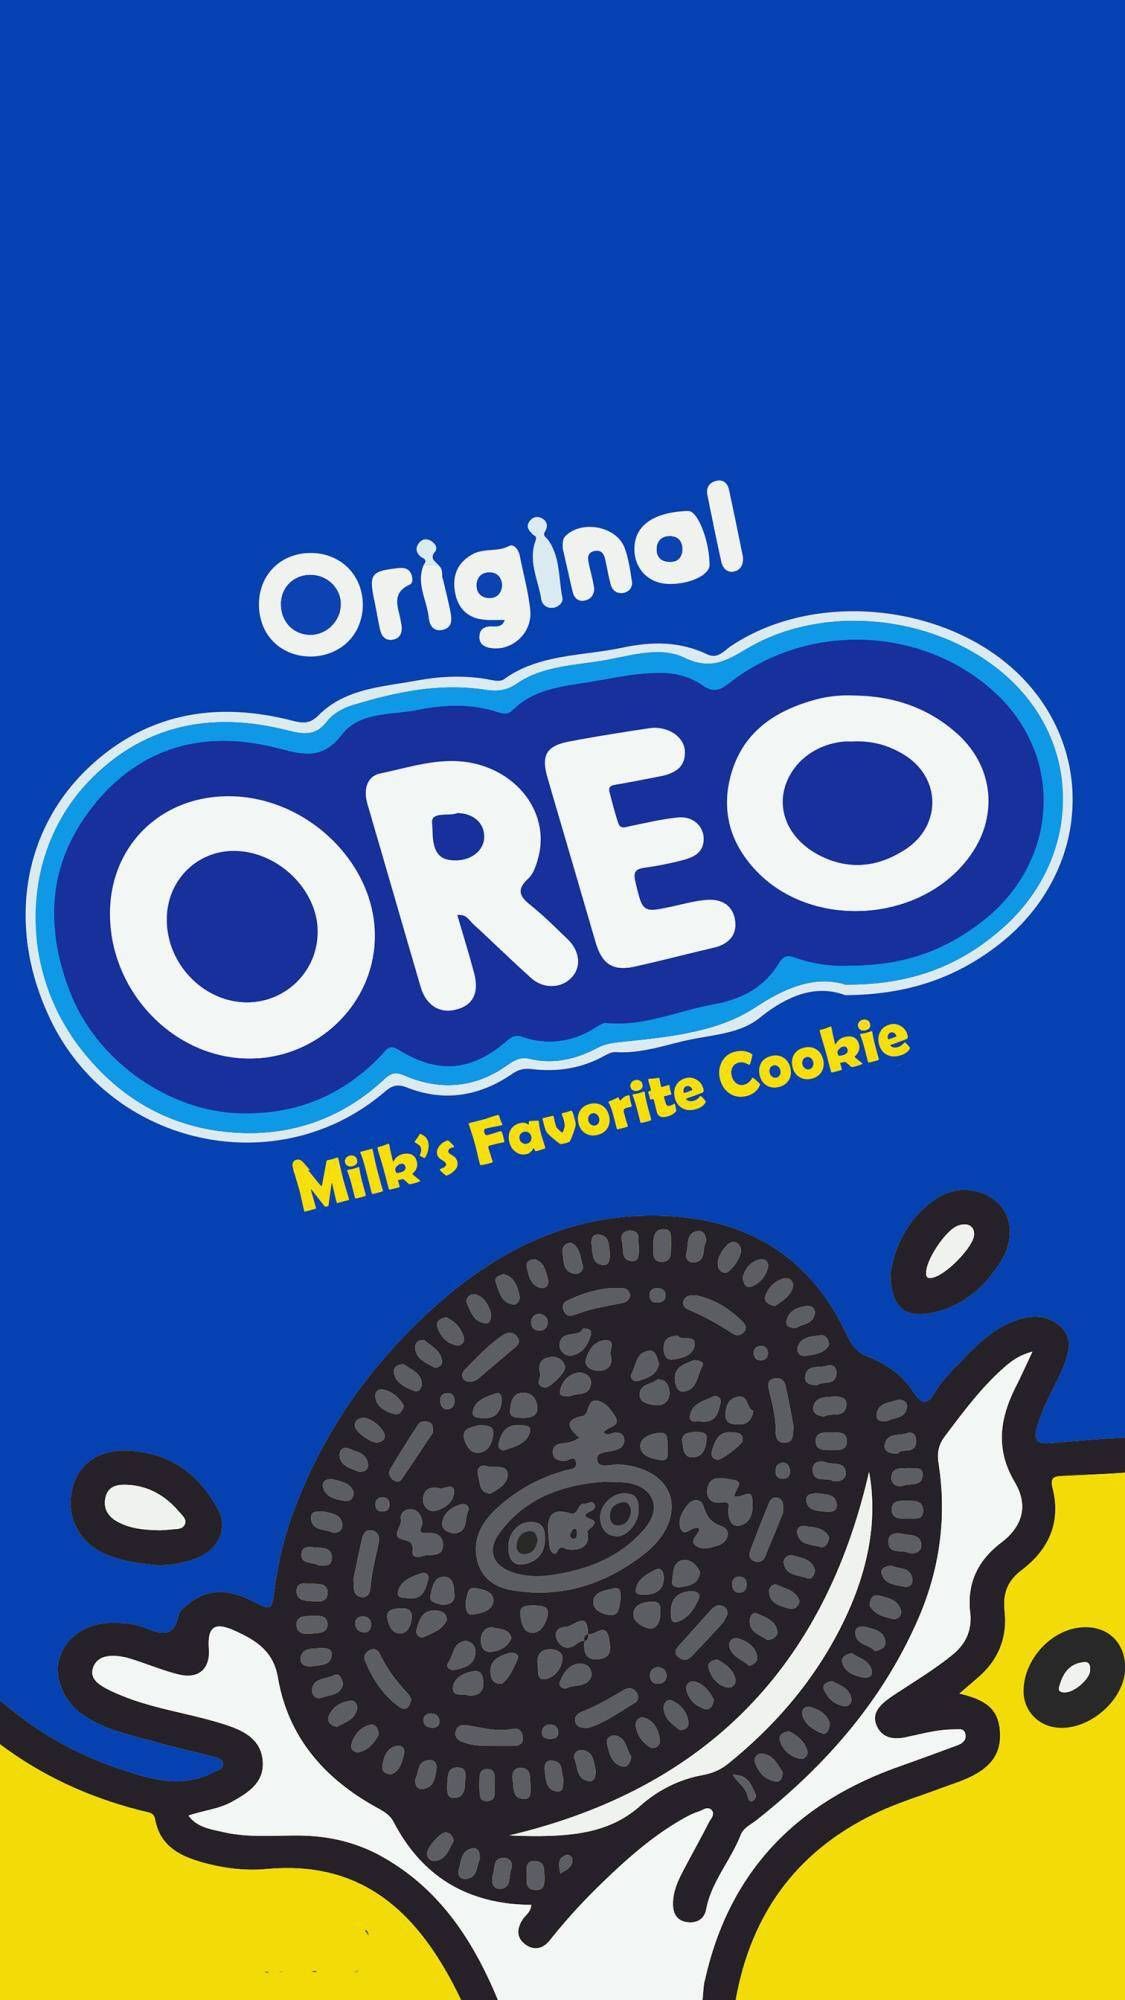 Oreo's iconic packaging is now available as a phone wallpaper - Oreo